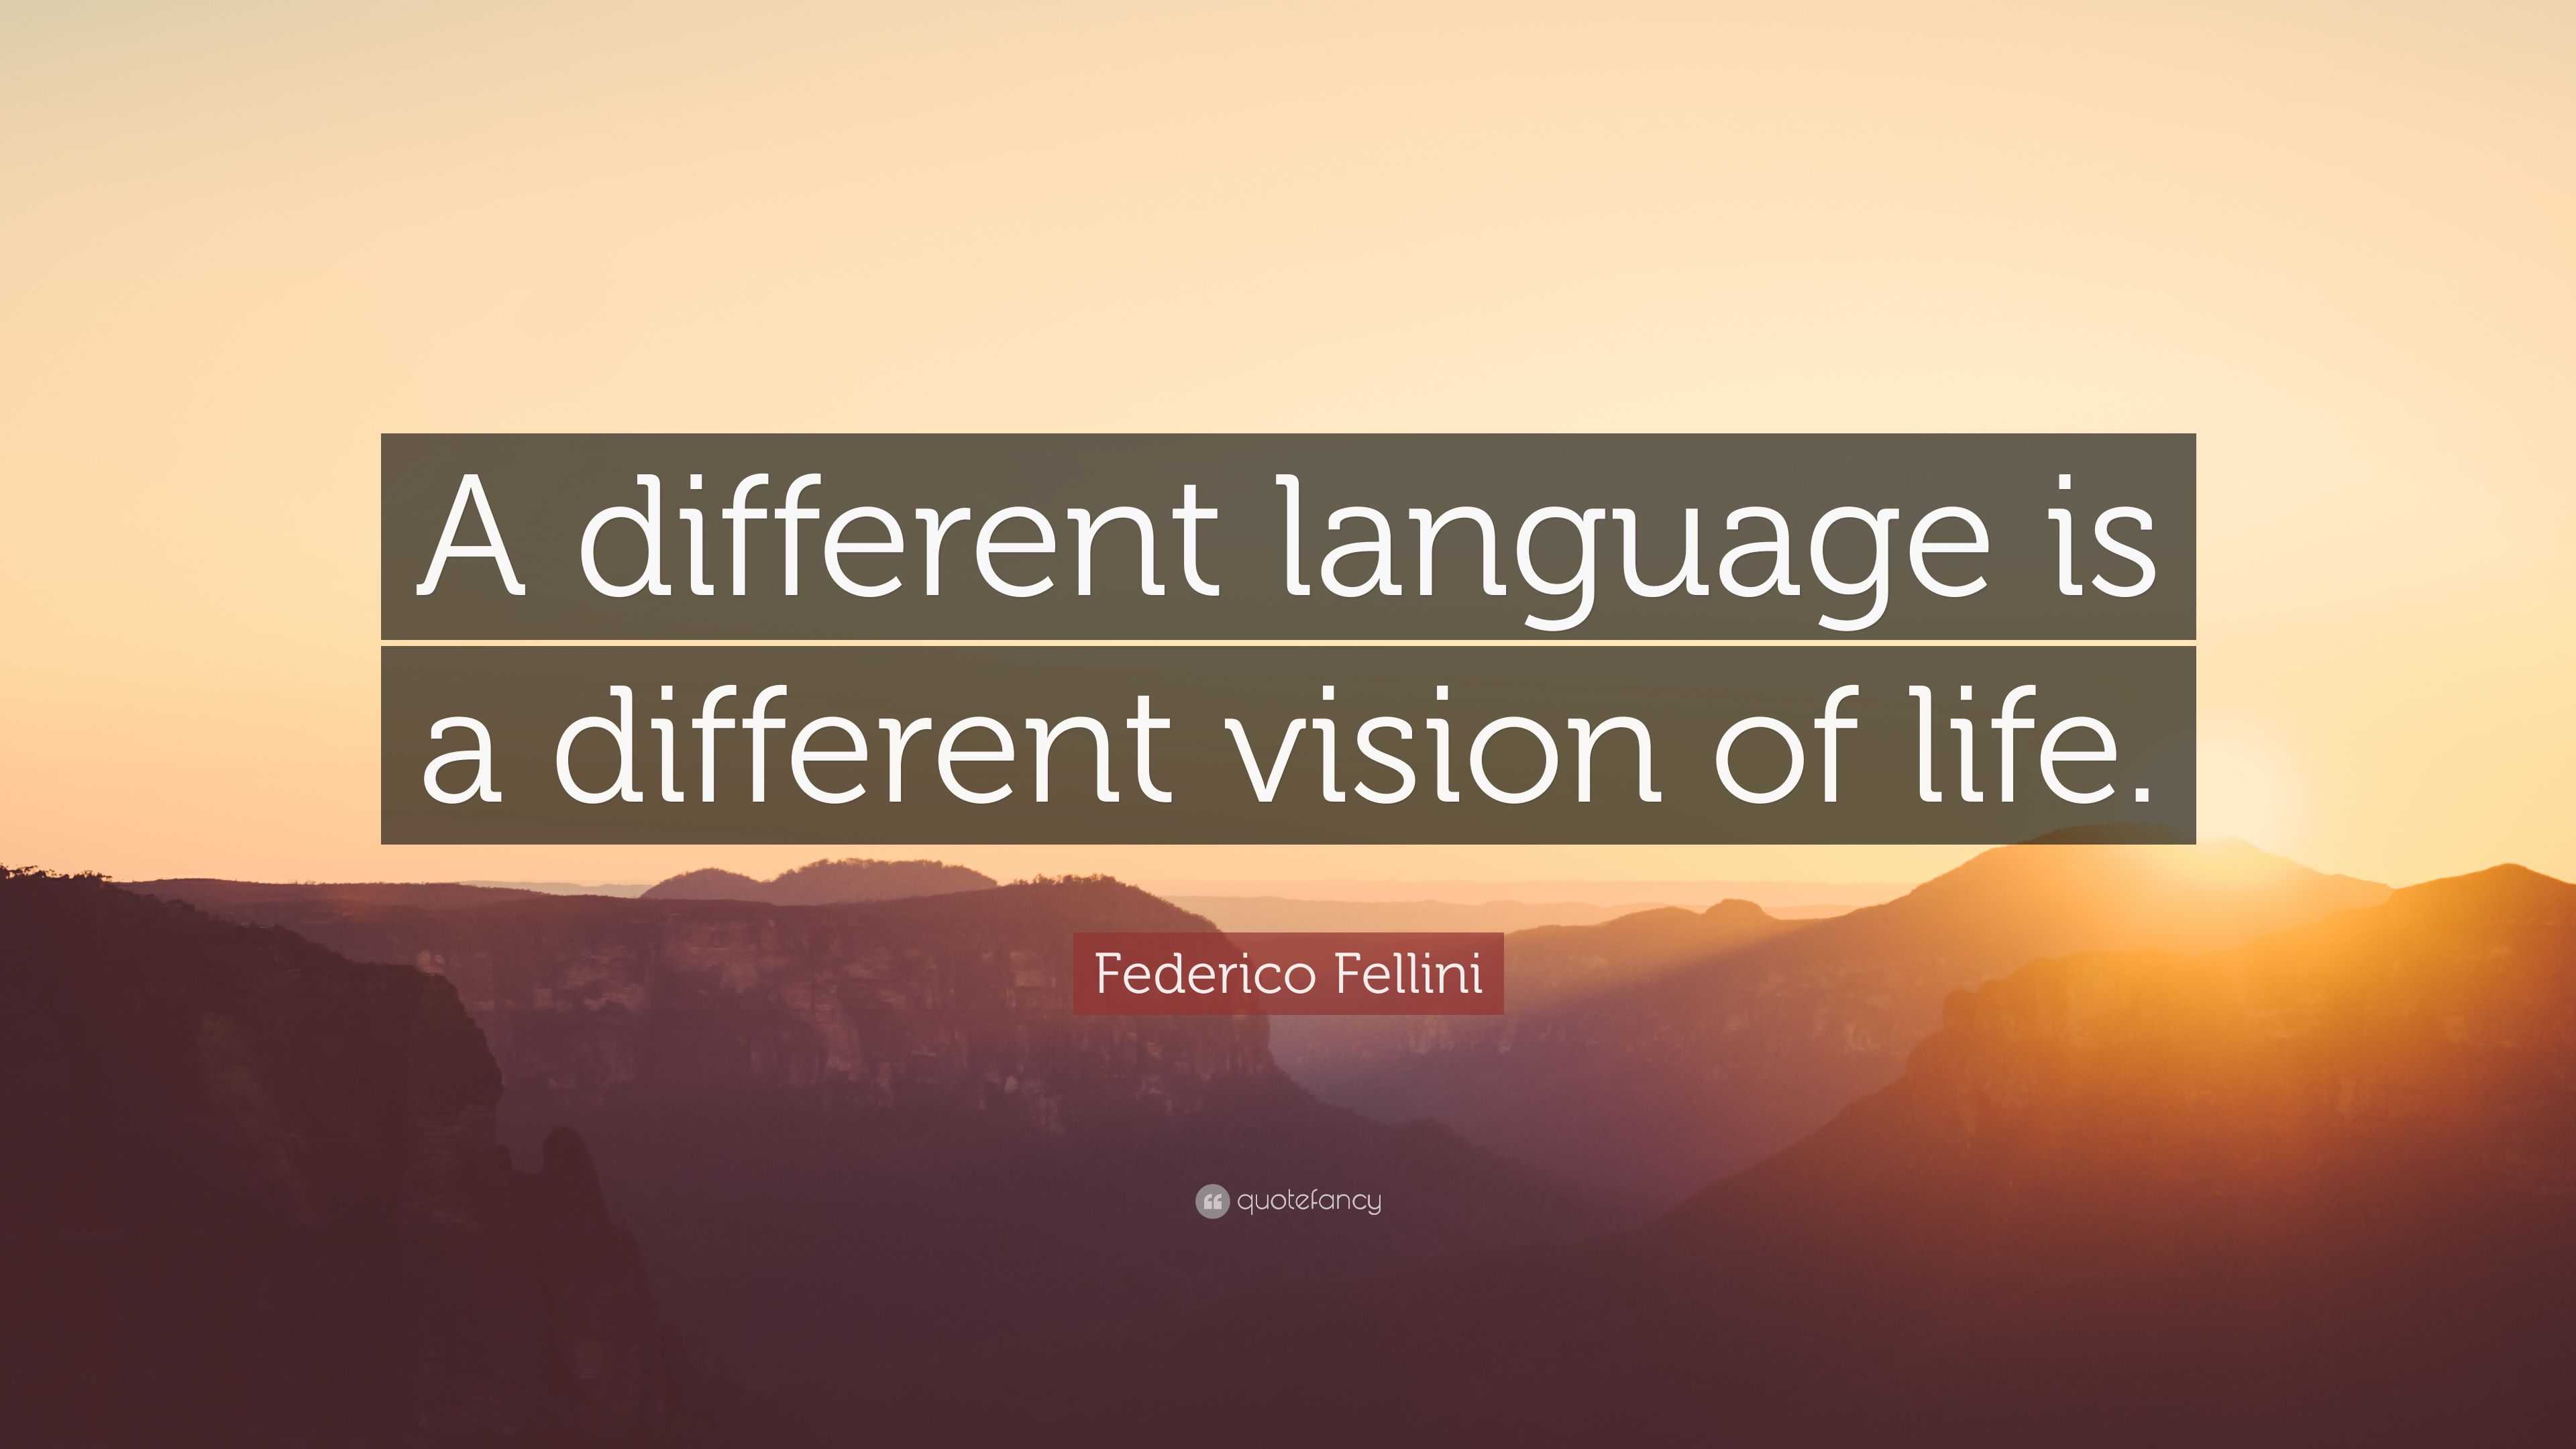 Federico Fellini Quote: “A different language is a different vision of